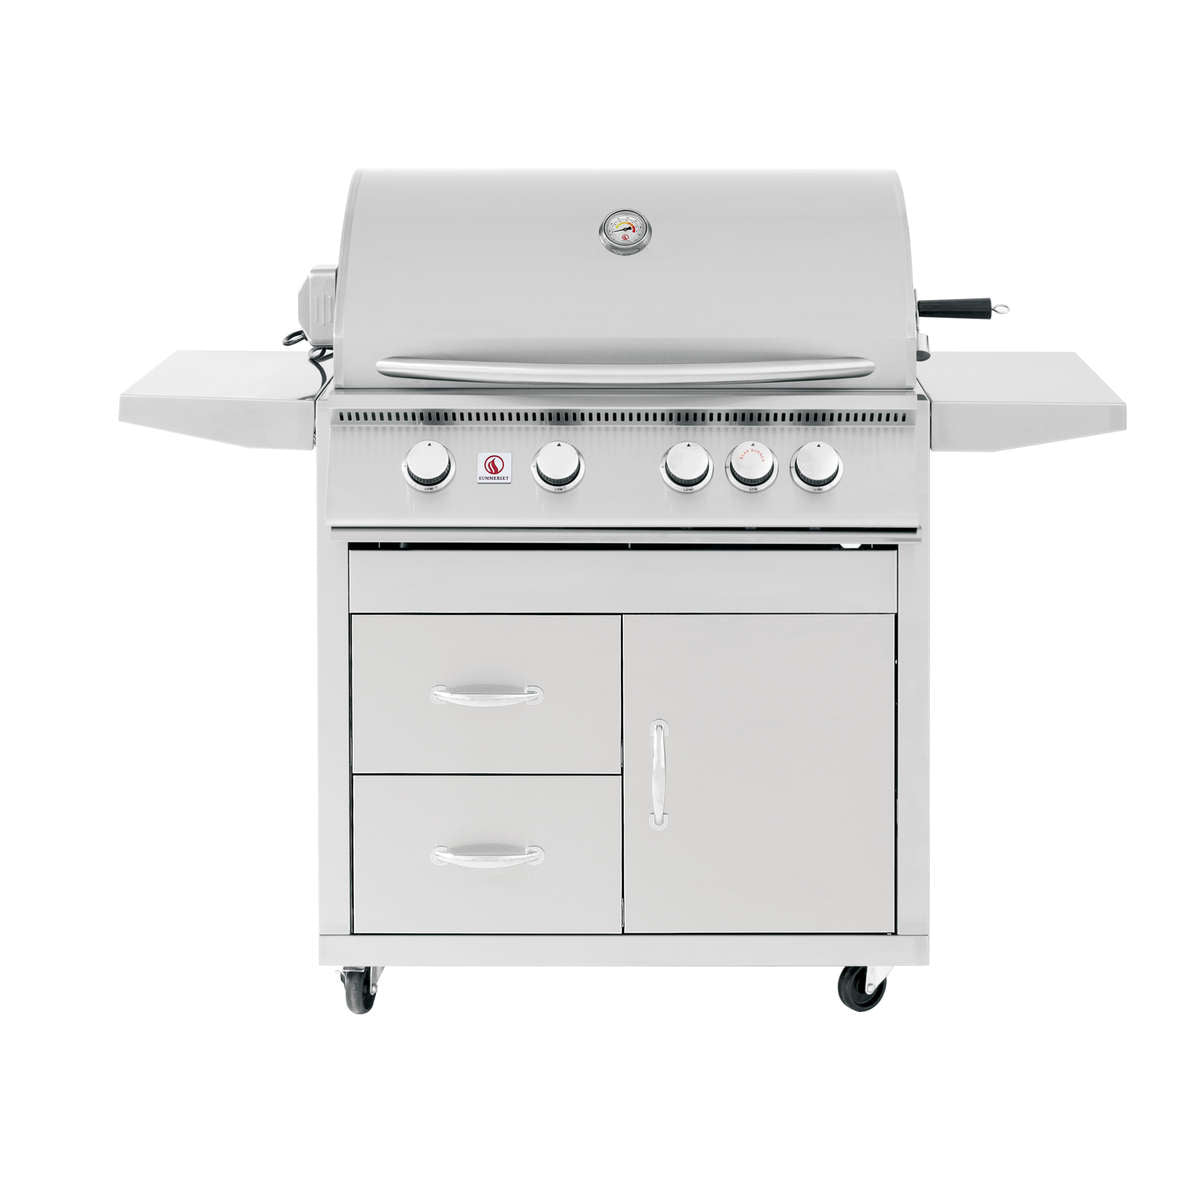 Summerset Sizzler 32 Inch Propane Grill on Cart